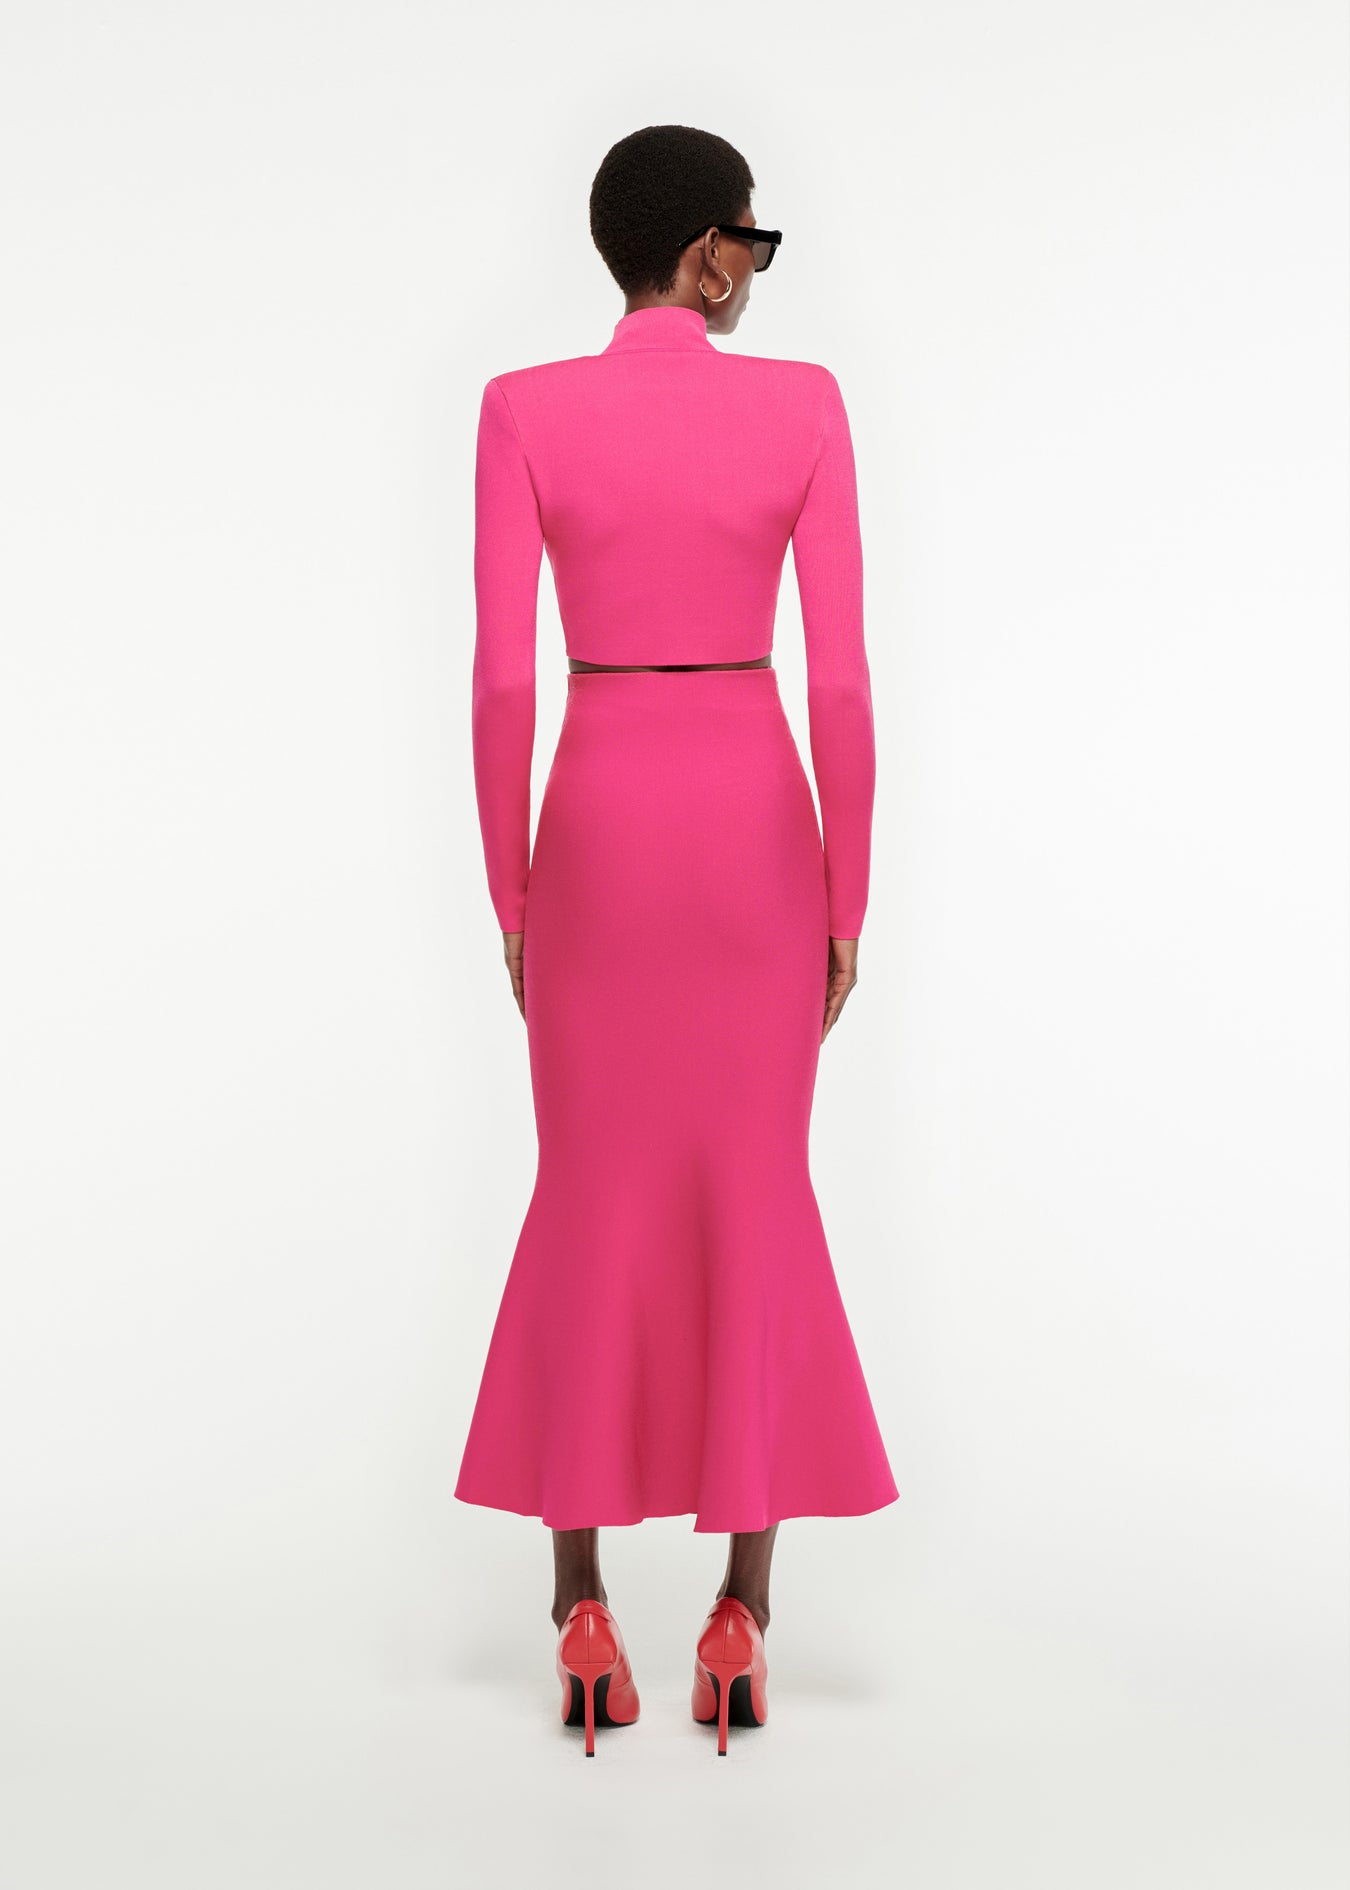 The back of a woman wearing the Fluted Knit Midi Skirt in Pink